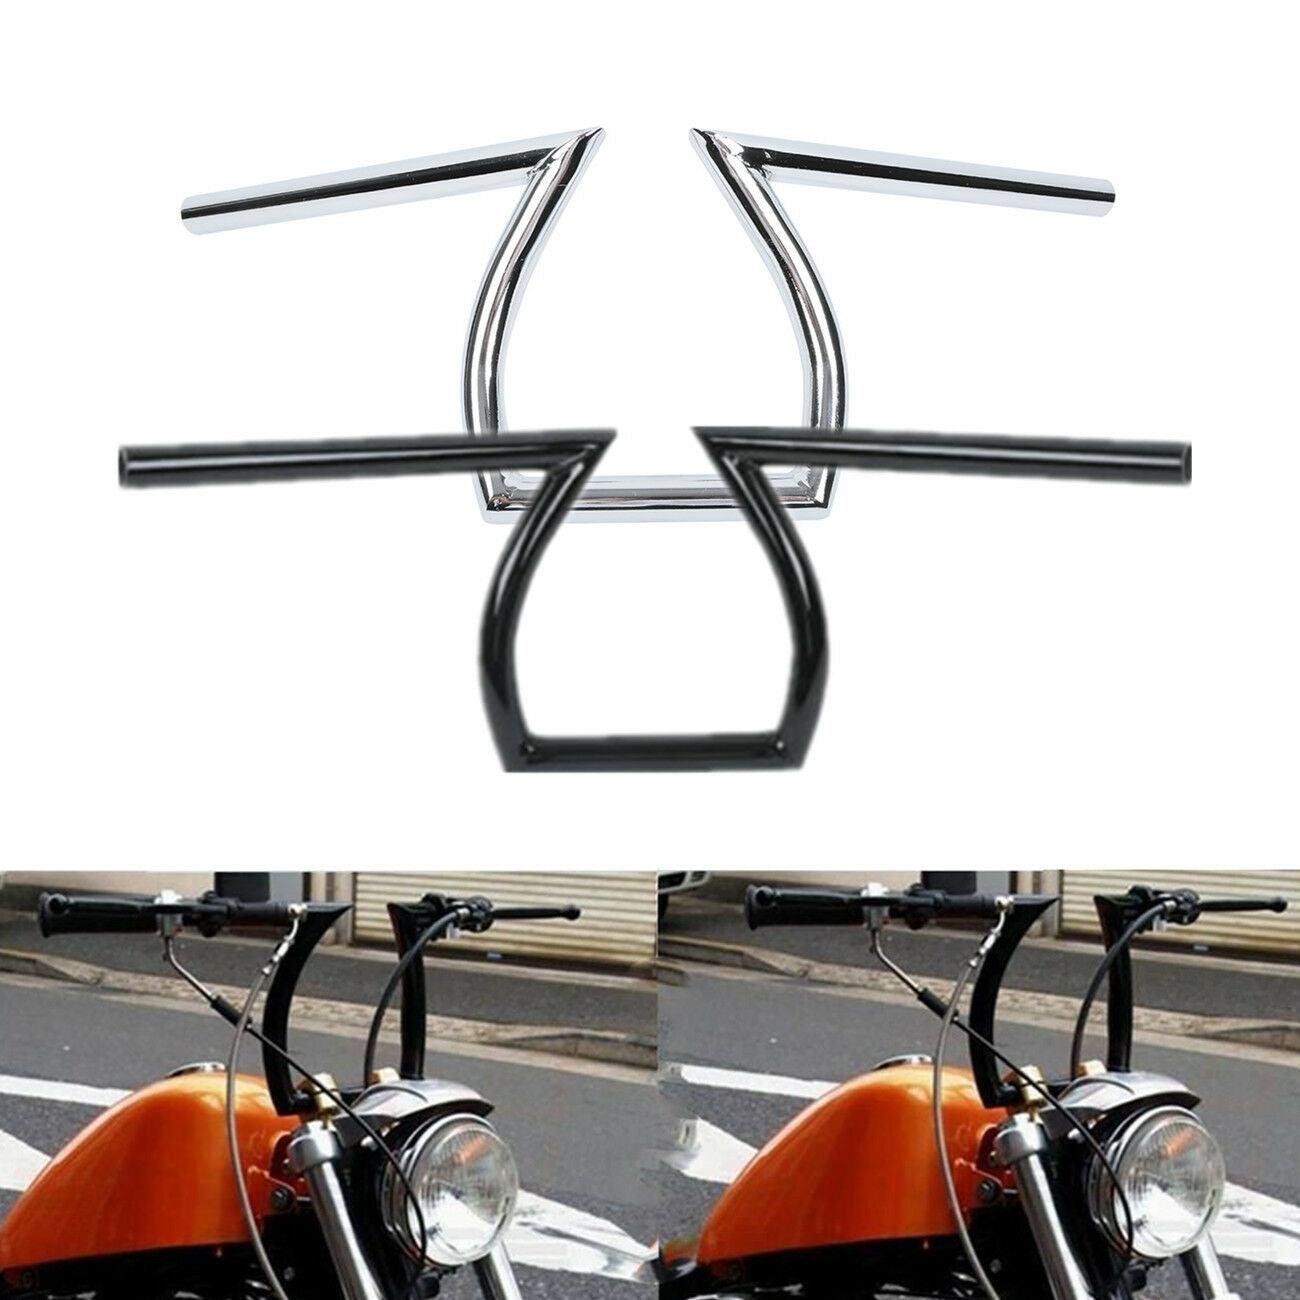 1" Drag Handlebar Z Bars Fit For Harley Sportster Choppers Bobbers Yamaha Suzuki - Moto Life Products